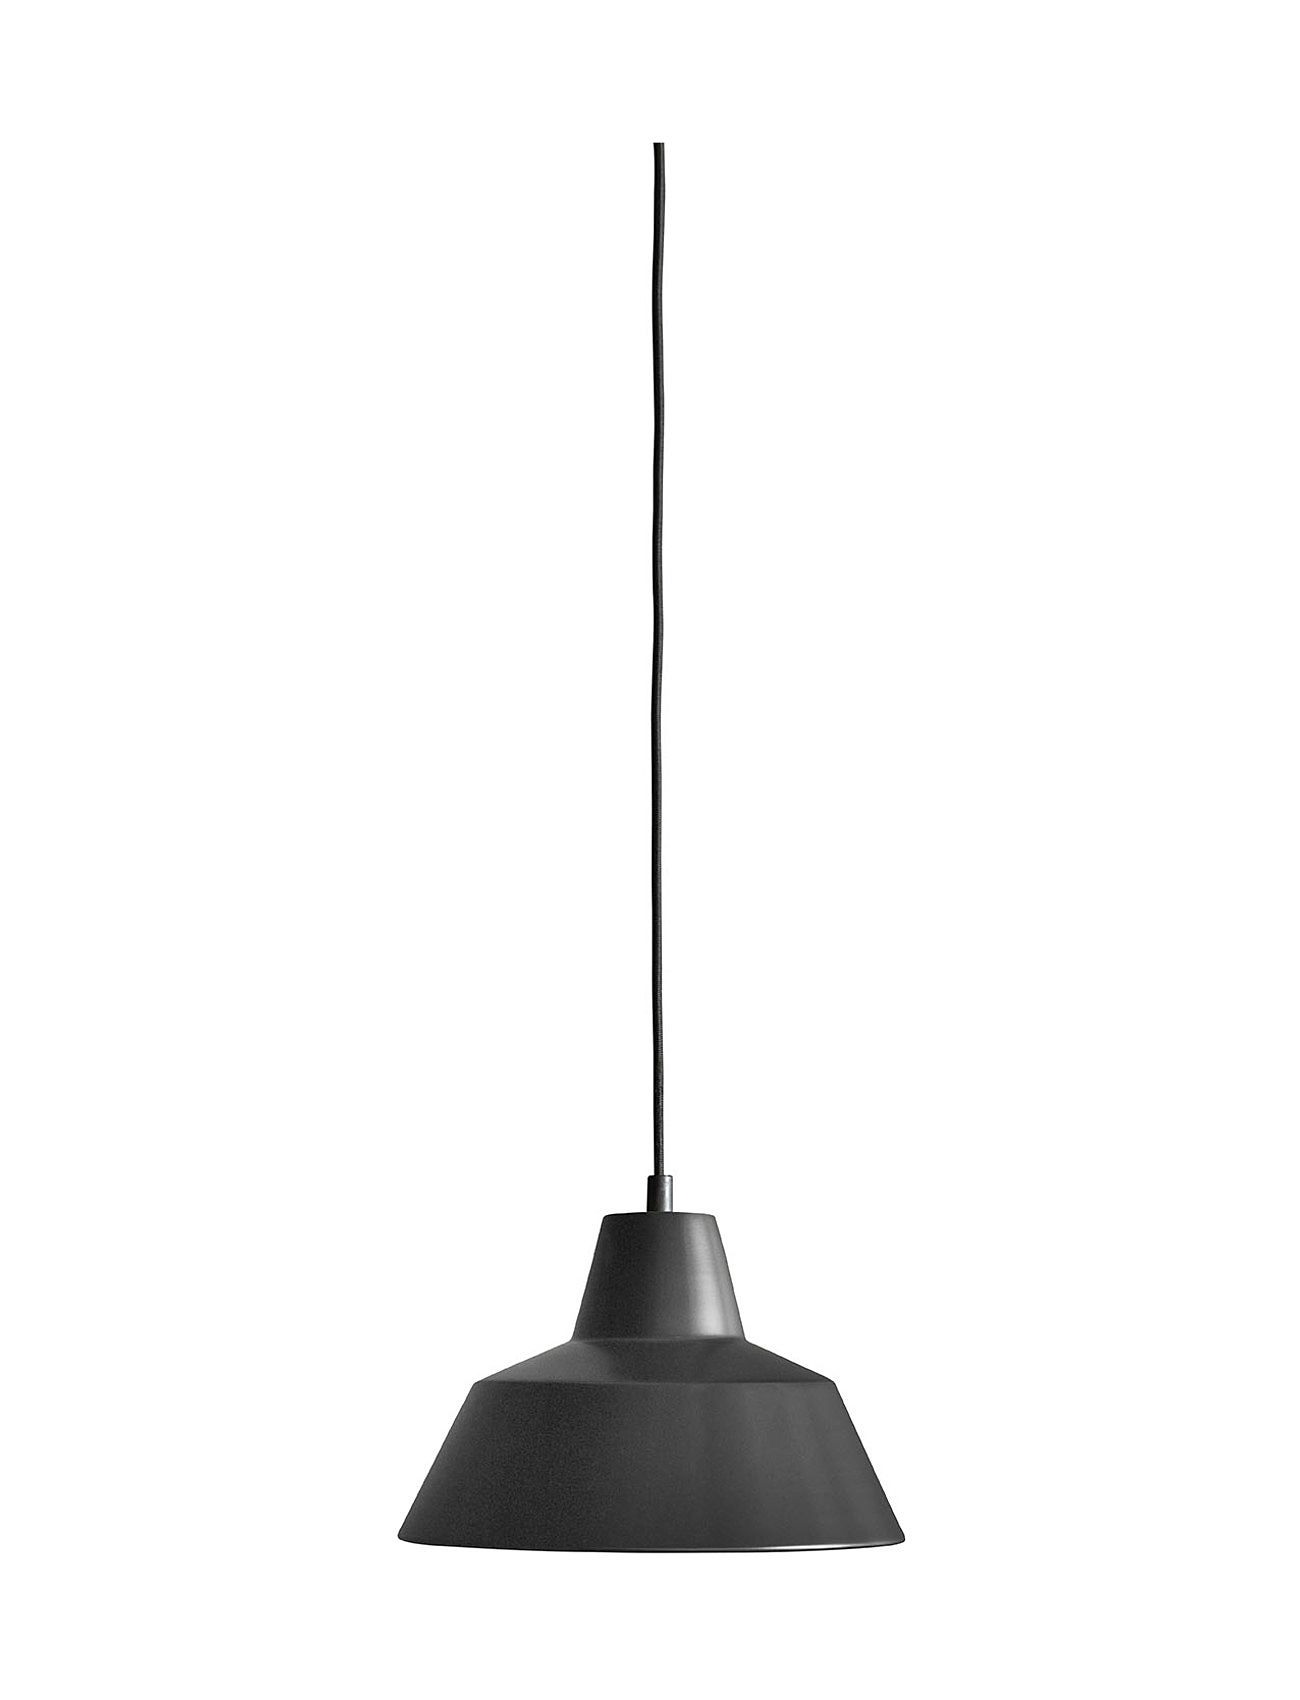 Workshop Lamp W2 Home Lighting Lamps Ceiling Lamps Pendant Lamps Black Made By Hand